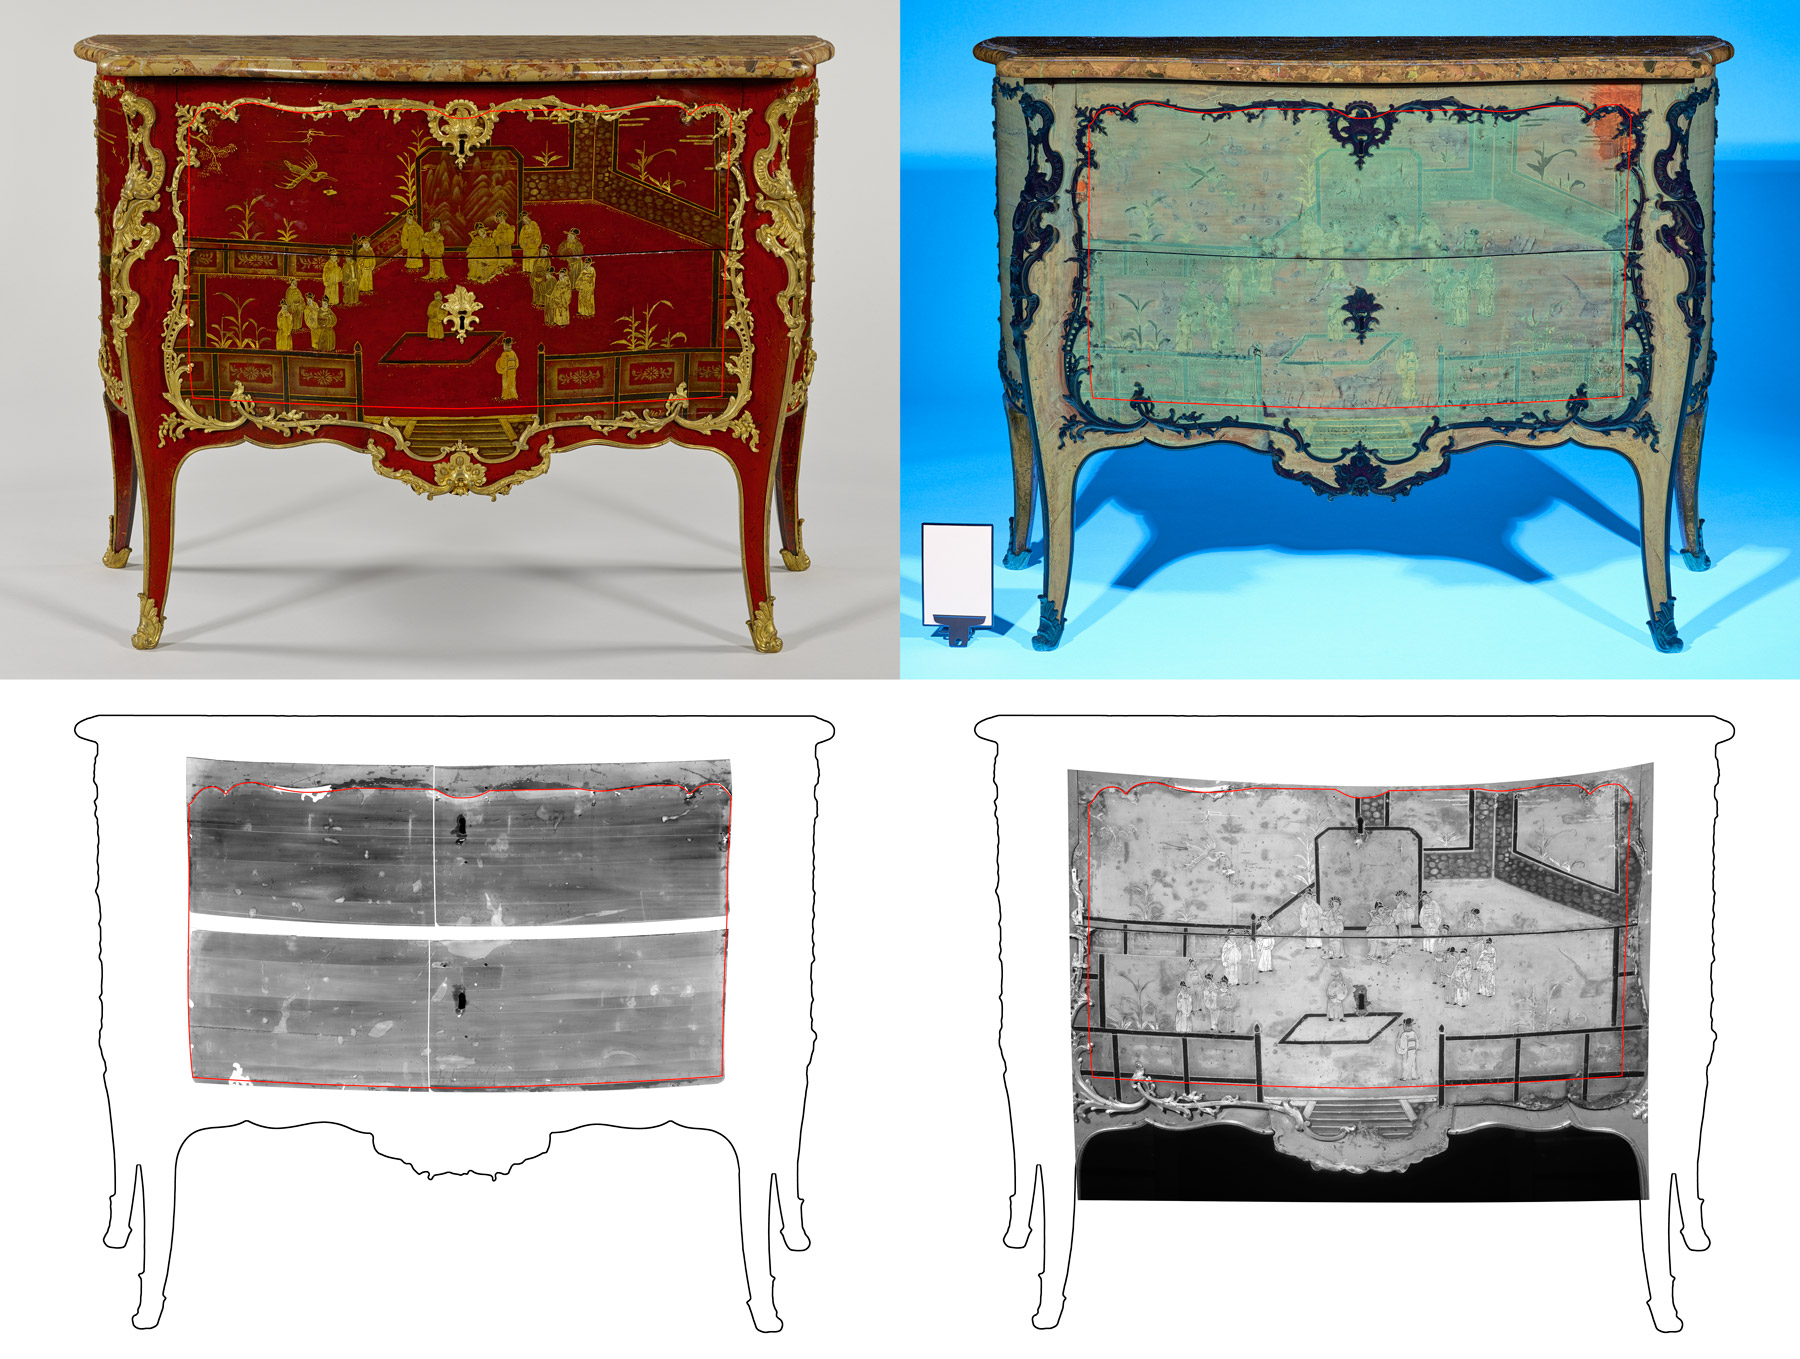 four images of the front of the commode arranged in four quadrants; one in reds and golds, one in teals and blues, and two in black and white with red outlines